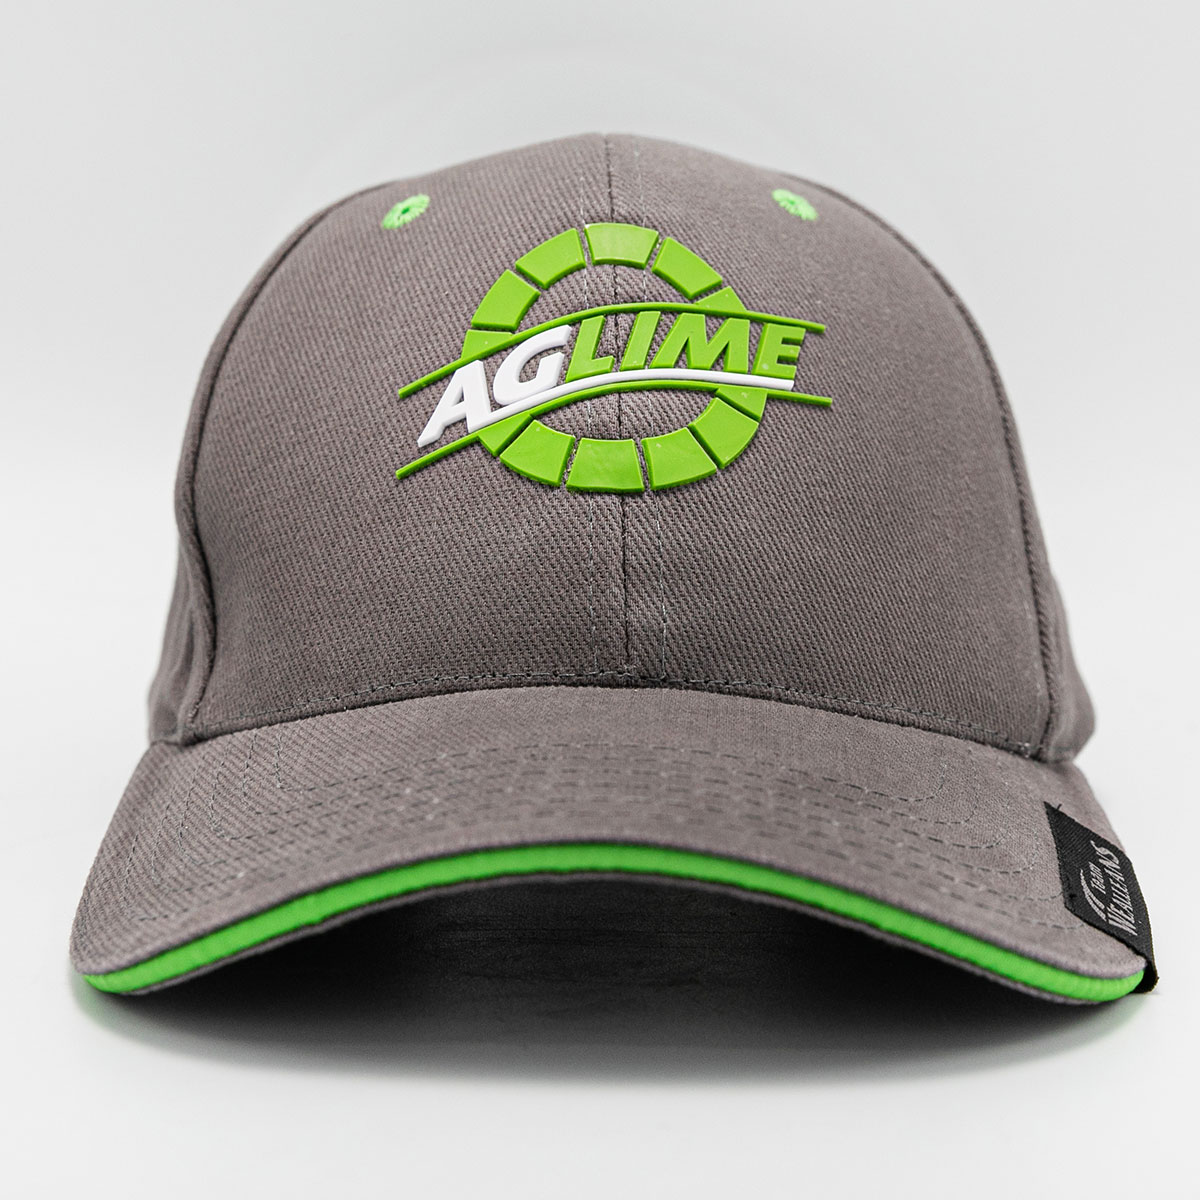 Grey Cap with Silicone Front Logo, Printed Peak Tag, contrast eyelets and sandwich